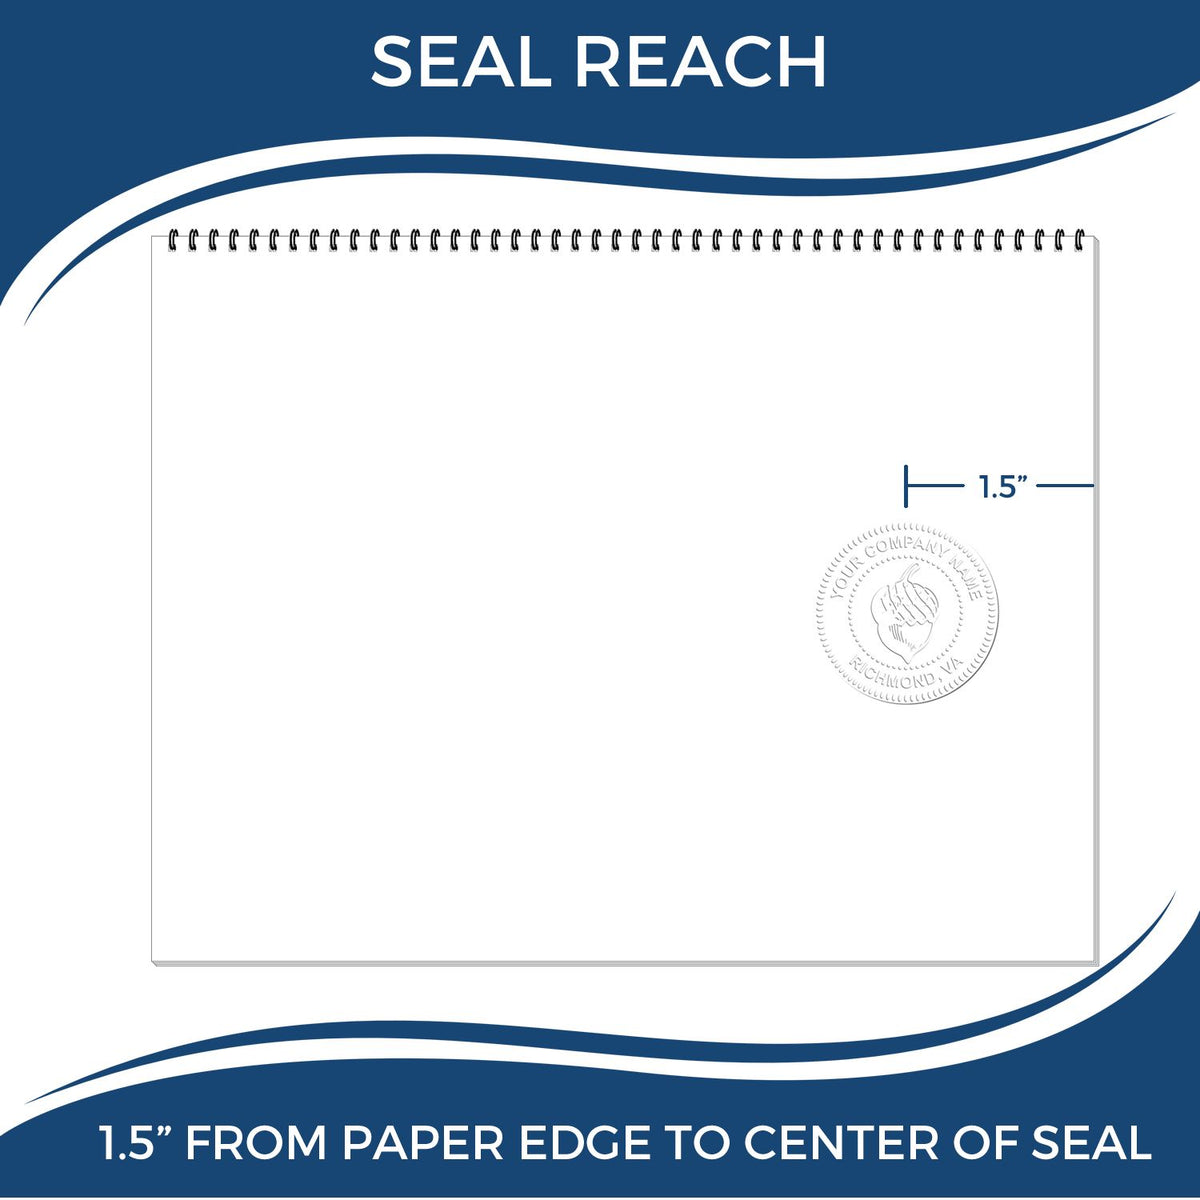 An infographic showing the seal reach which is represented by a ruler and a miniature seal image of the Gift Alaska Geologist Seal